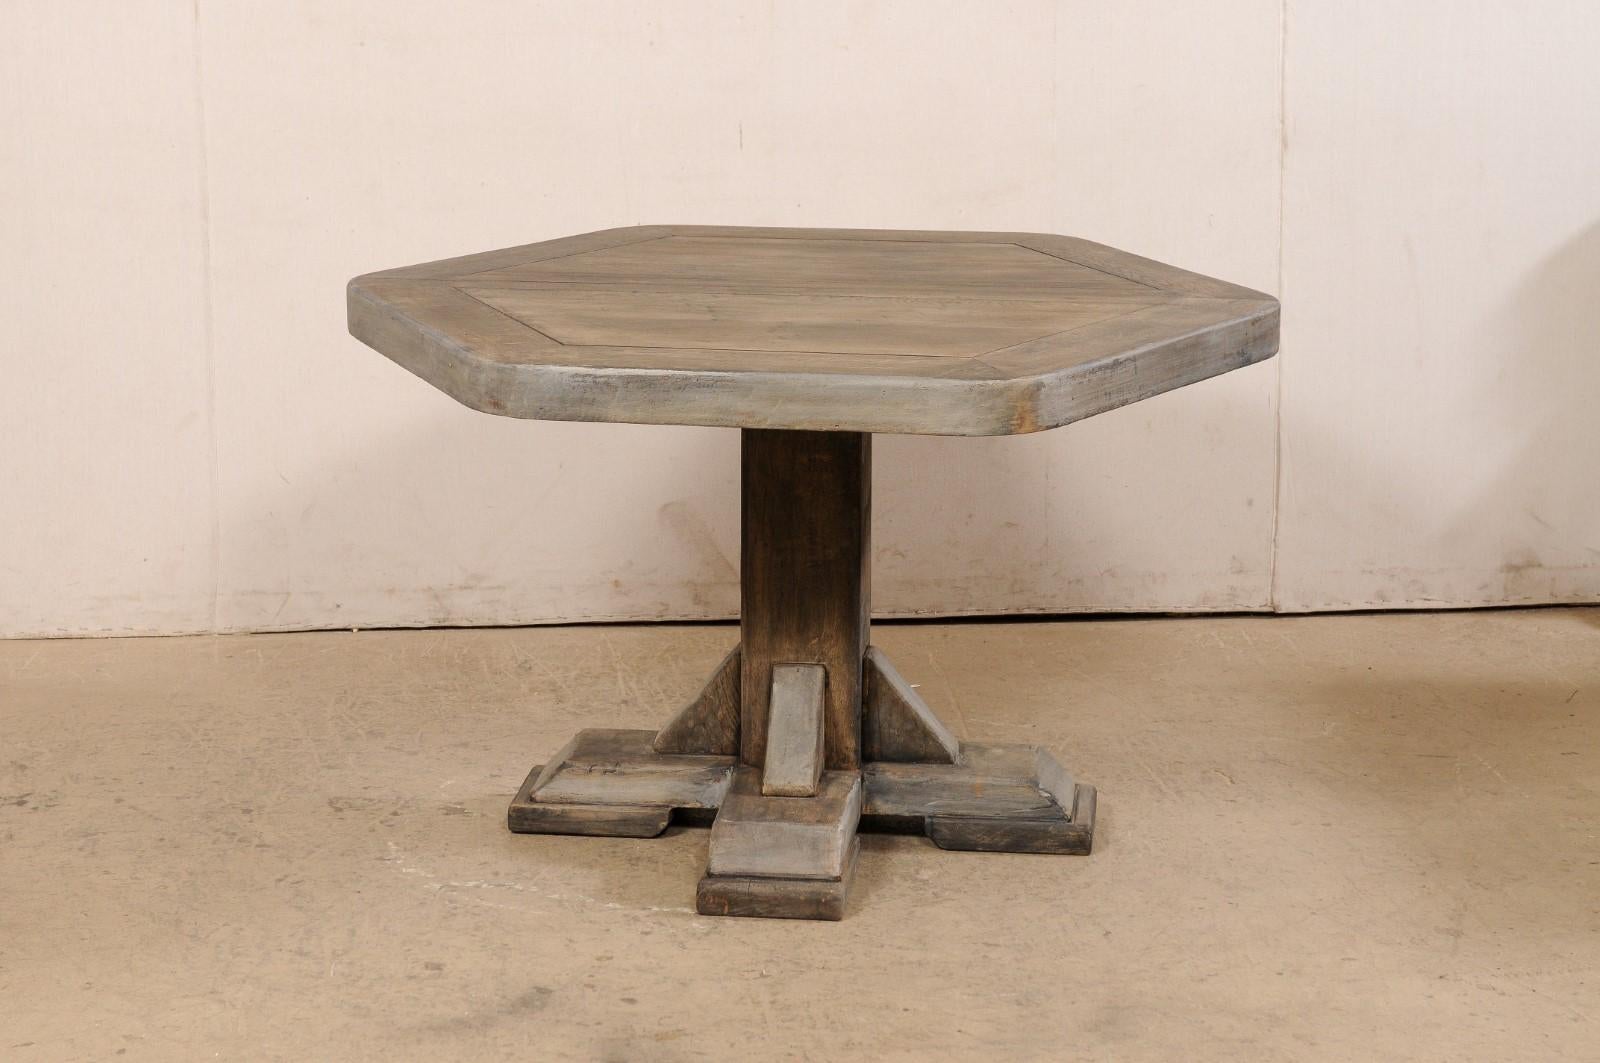 European Hexagon-Shaped Wooden Pedestal Table, Mid 20th century For Sale 3